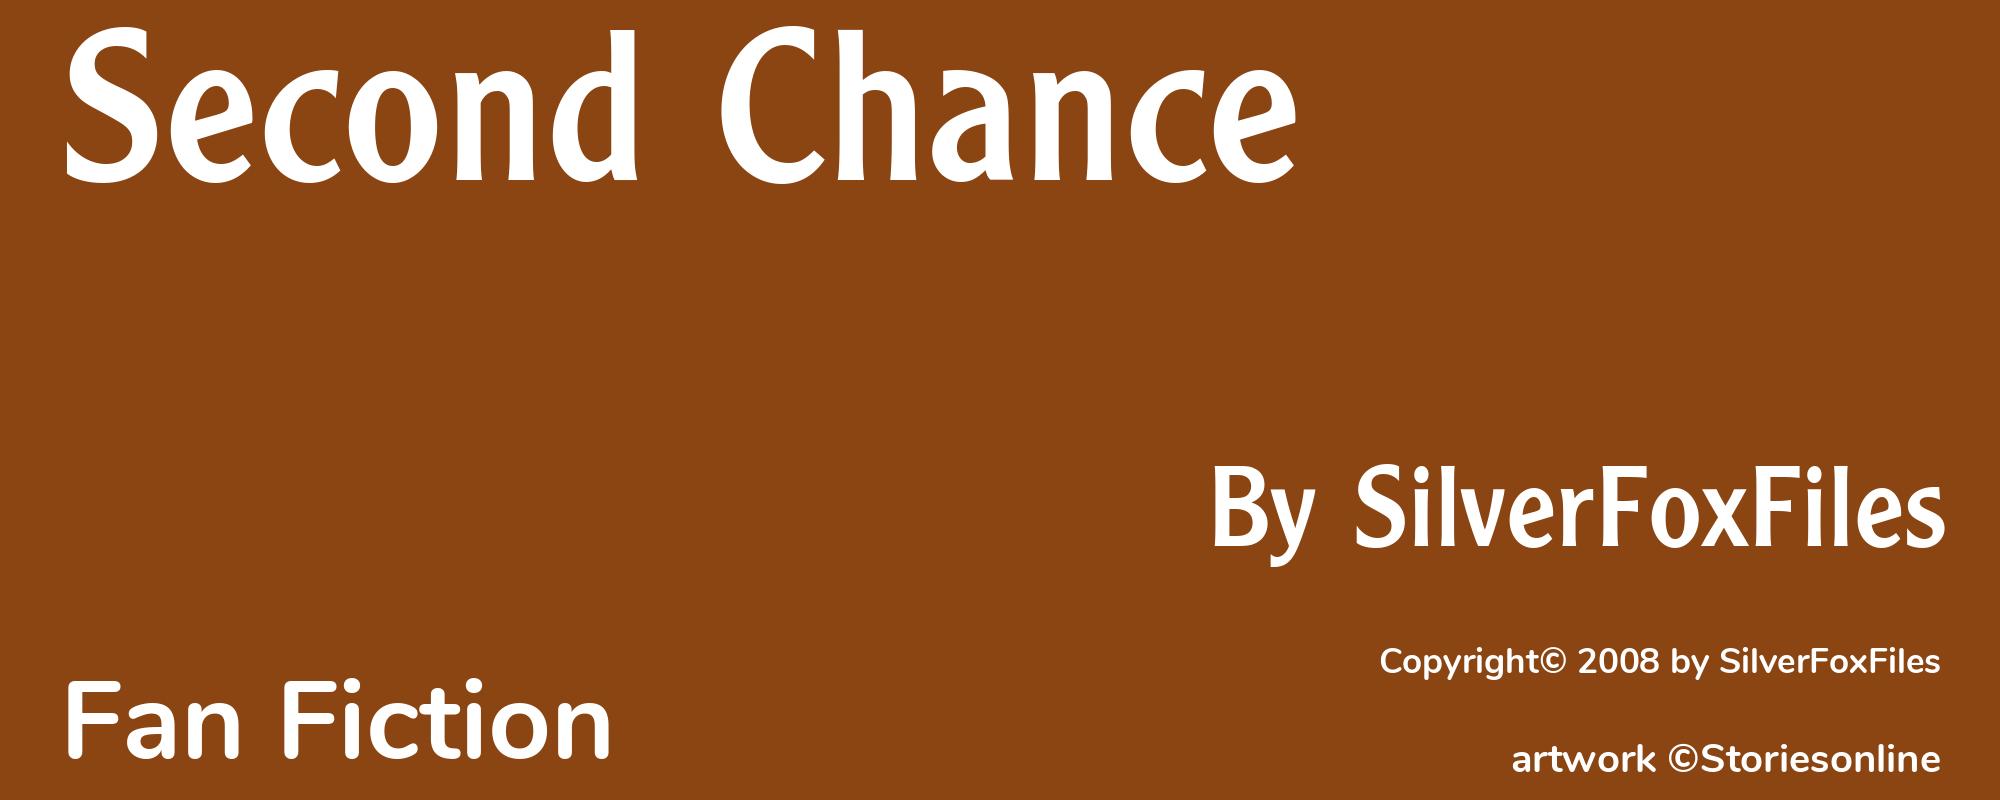 Second Chance - Cover